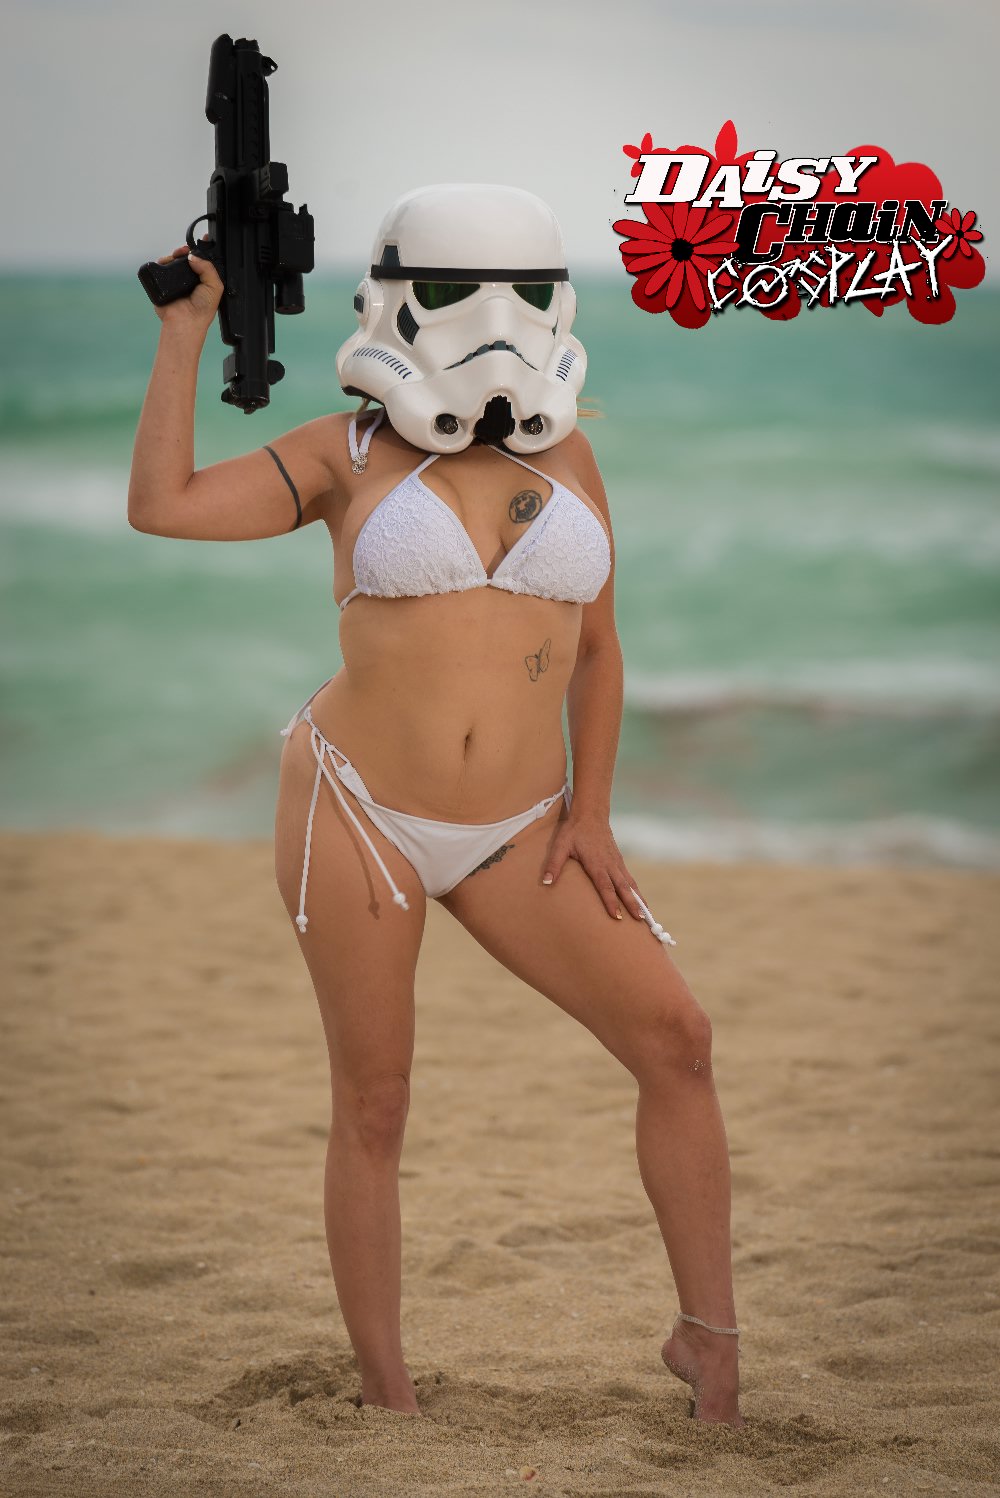 Sexy Storm Trooper - Daisy Chain Coplay #3